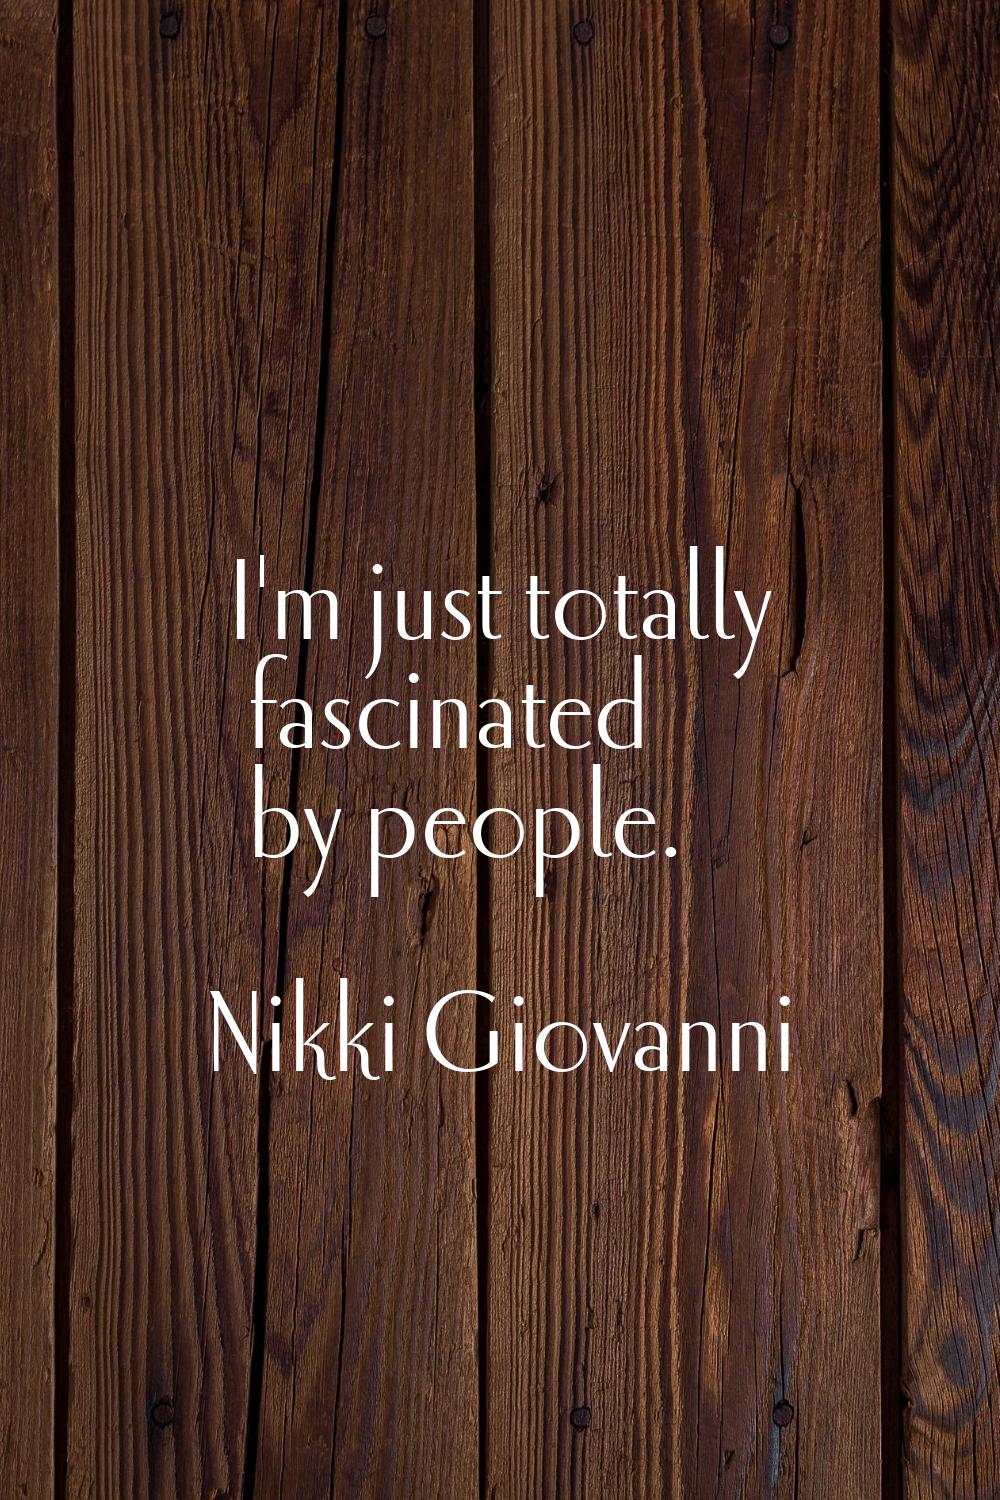 I'm just totally fascinated by people.